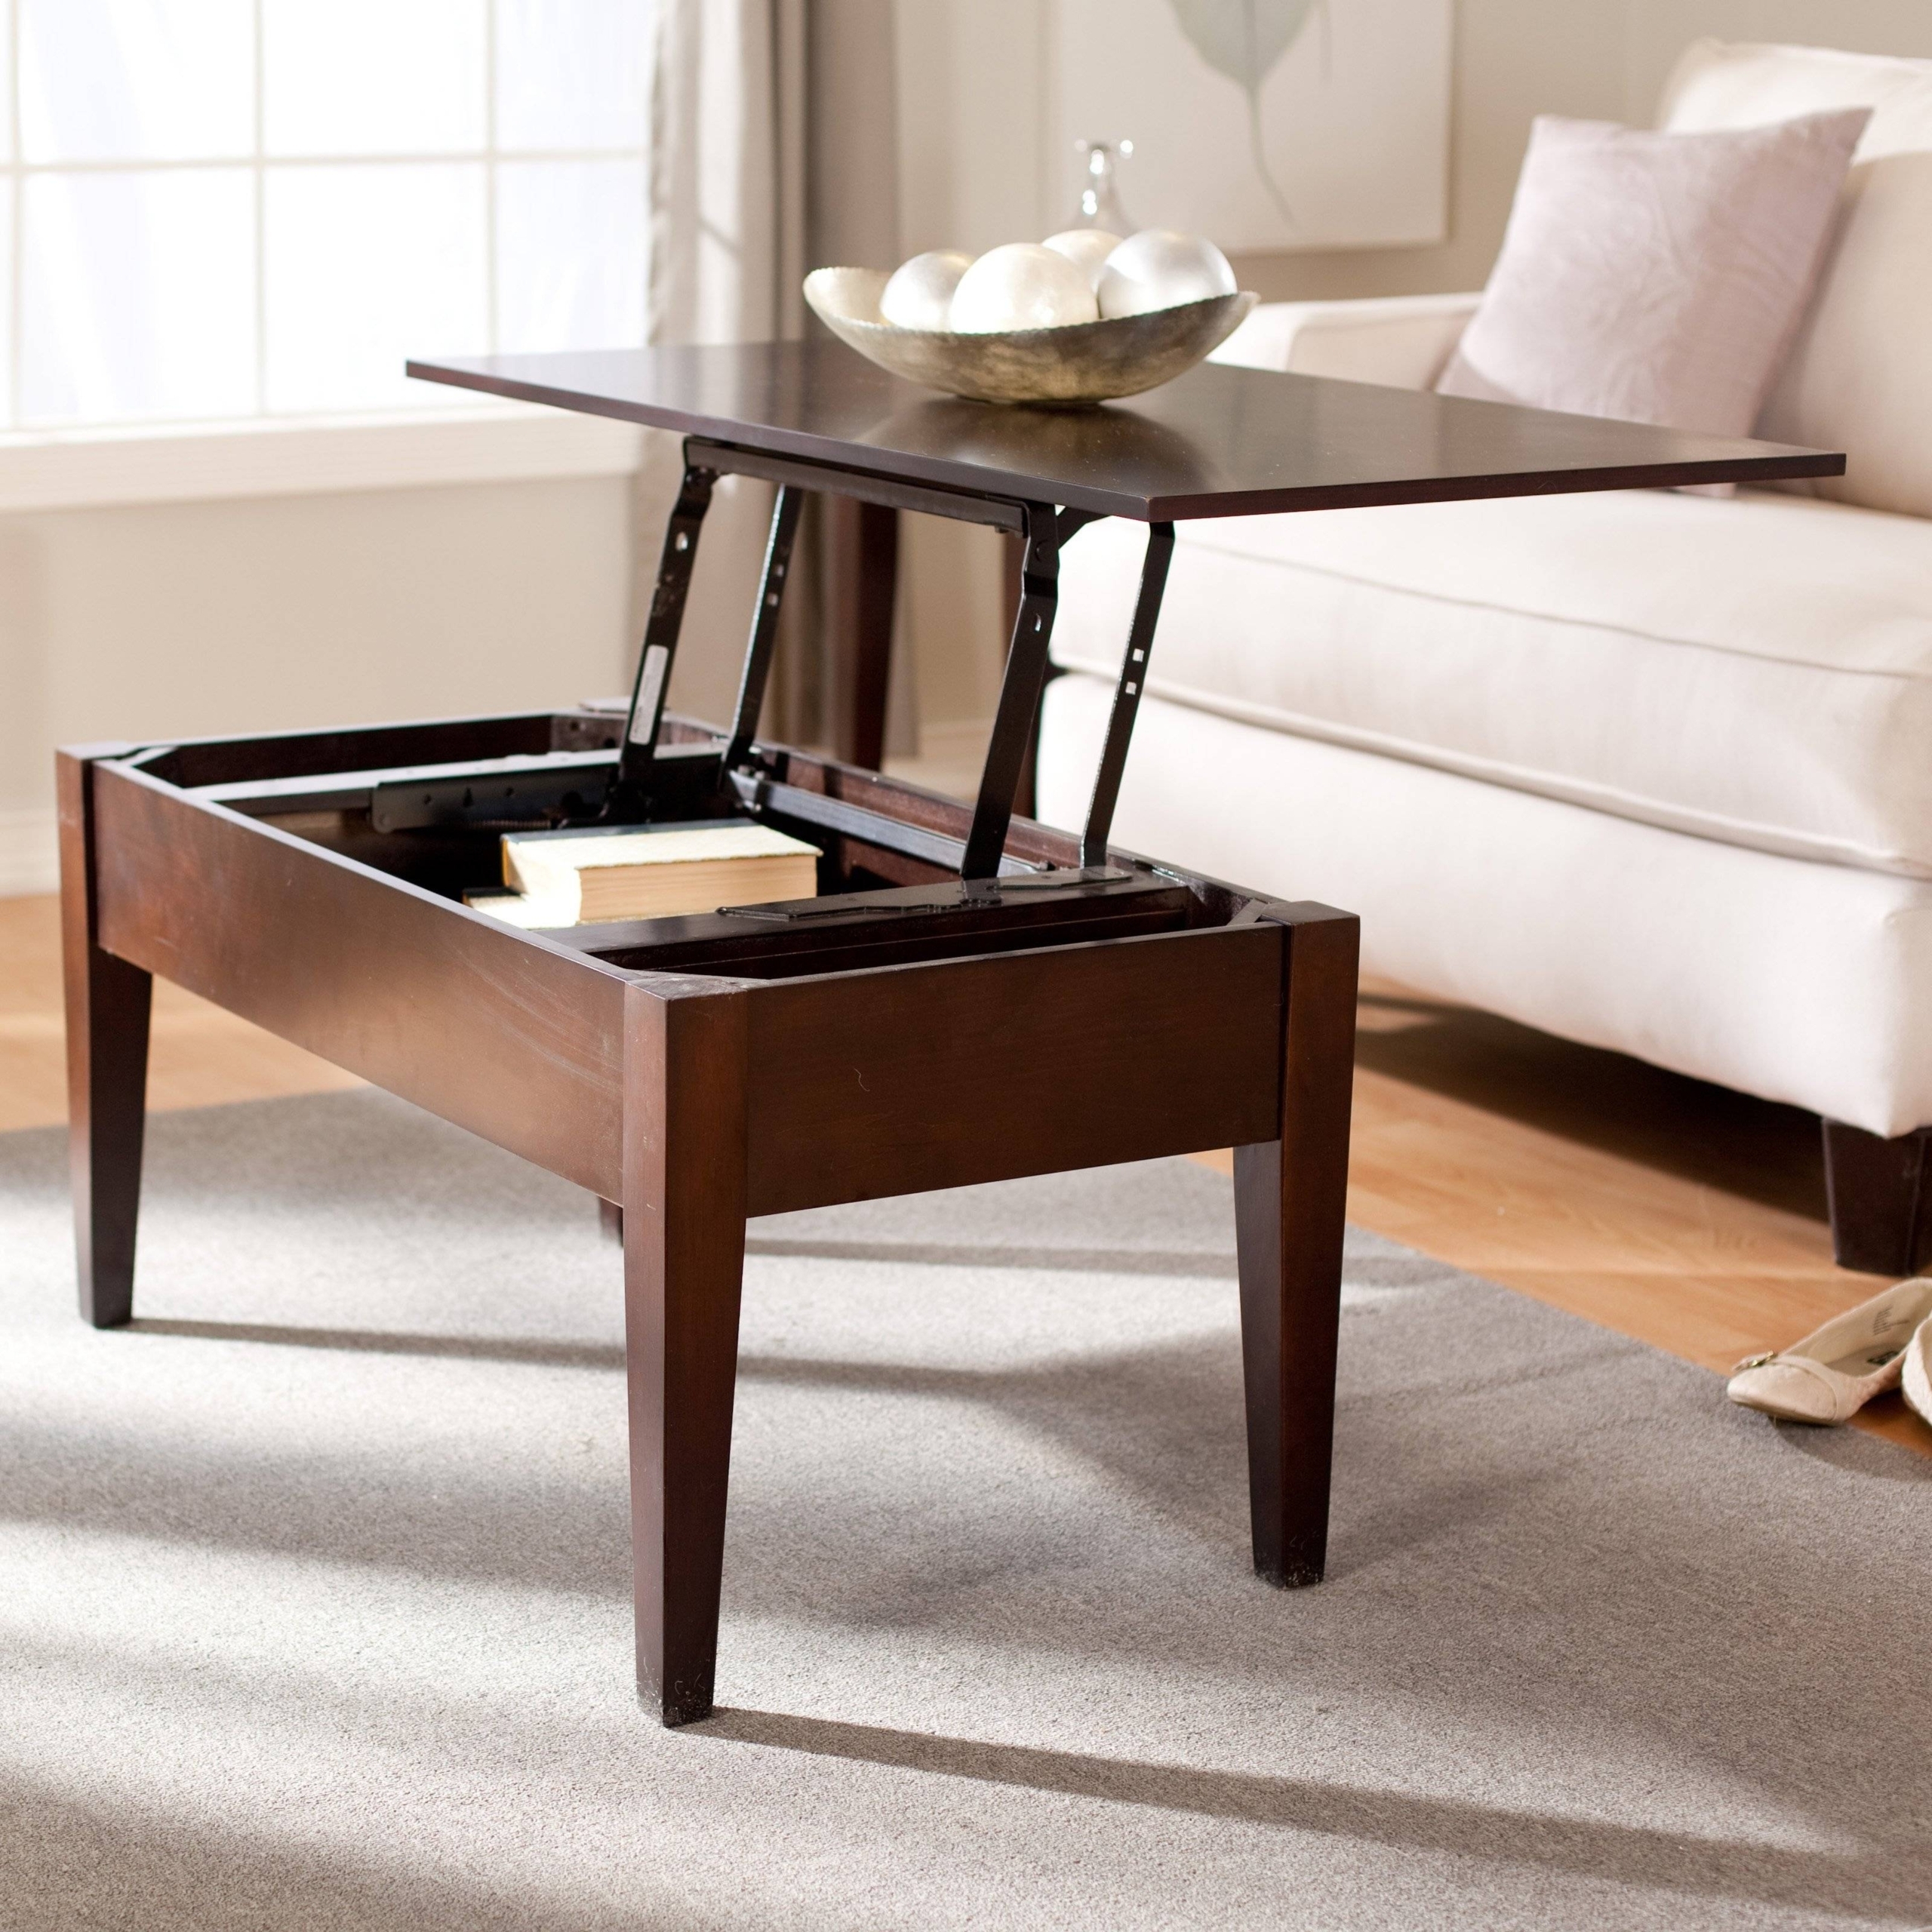 Lift Coffee Tables 